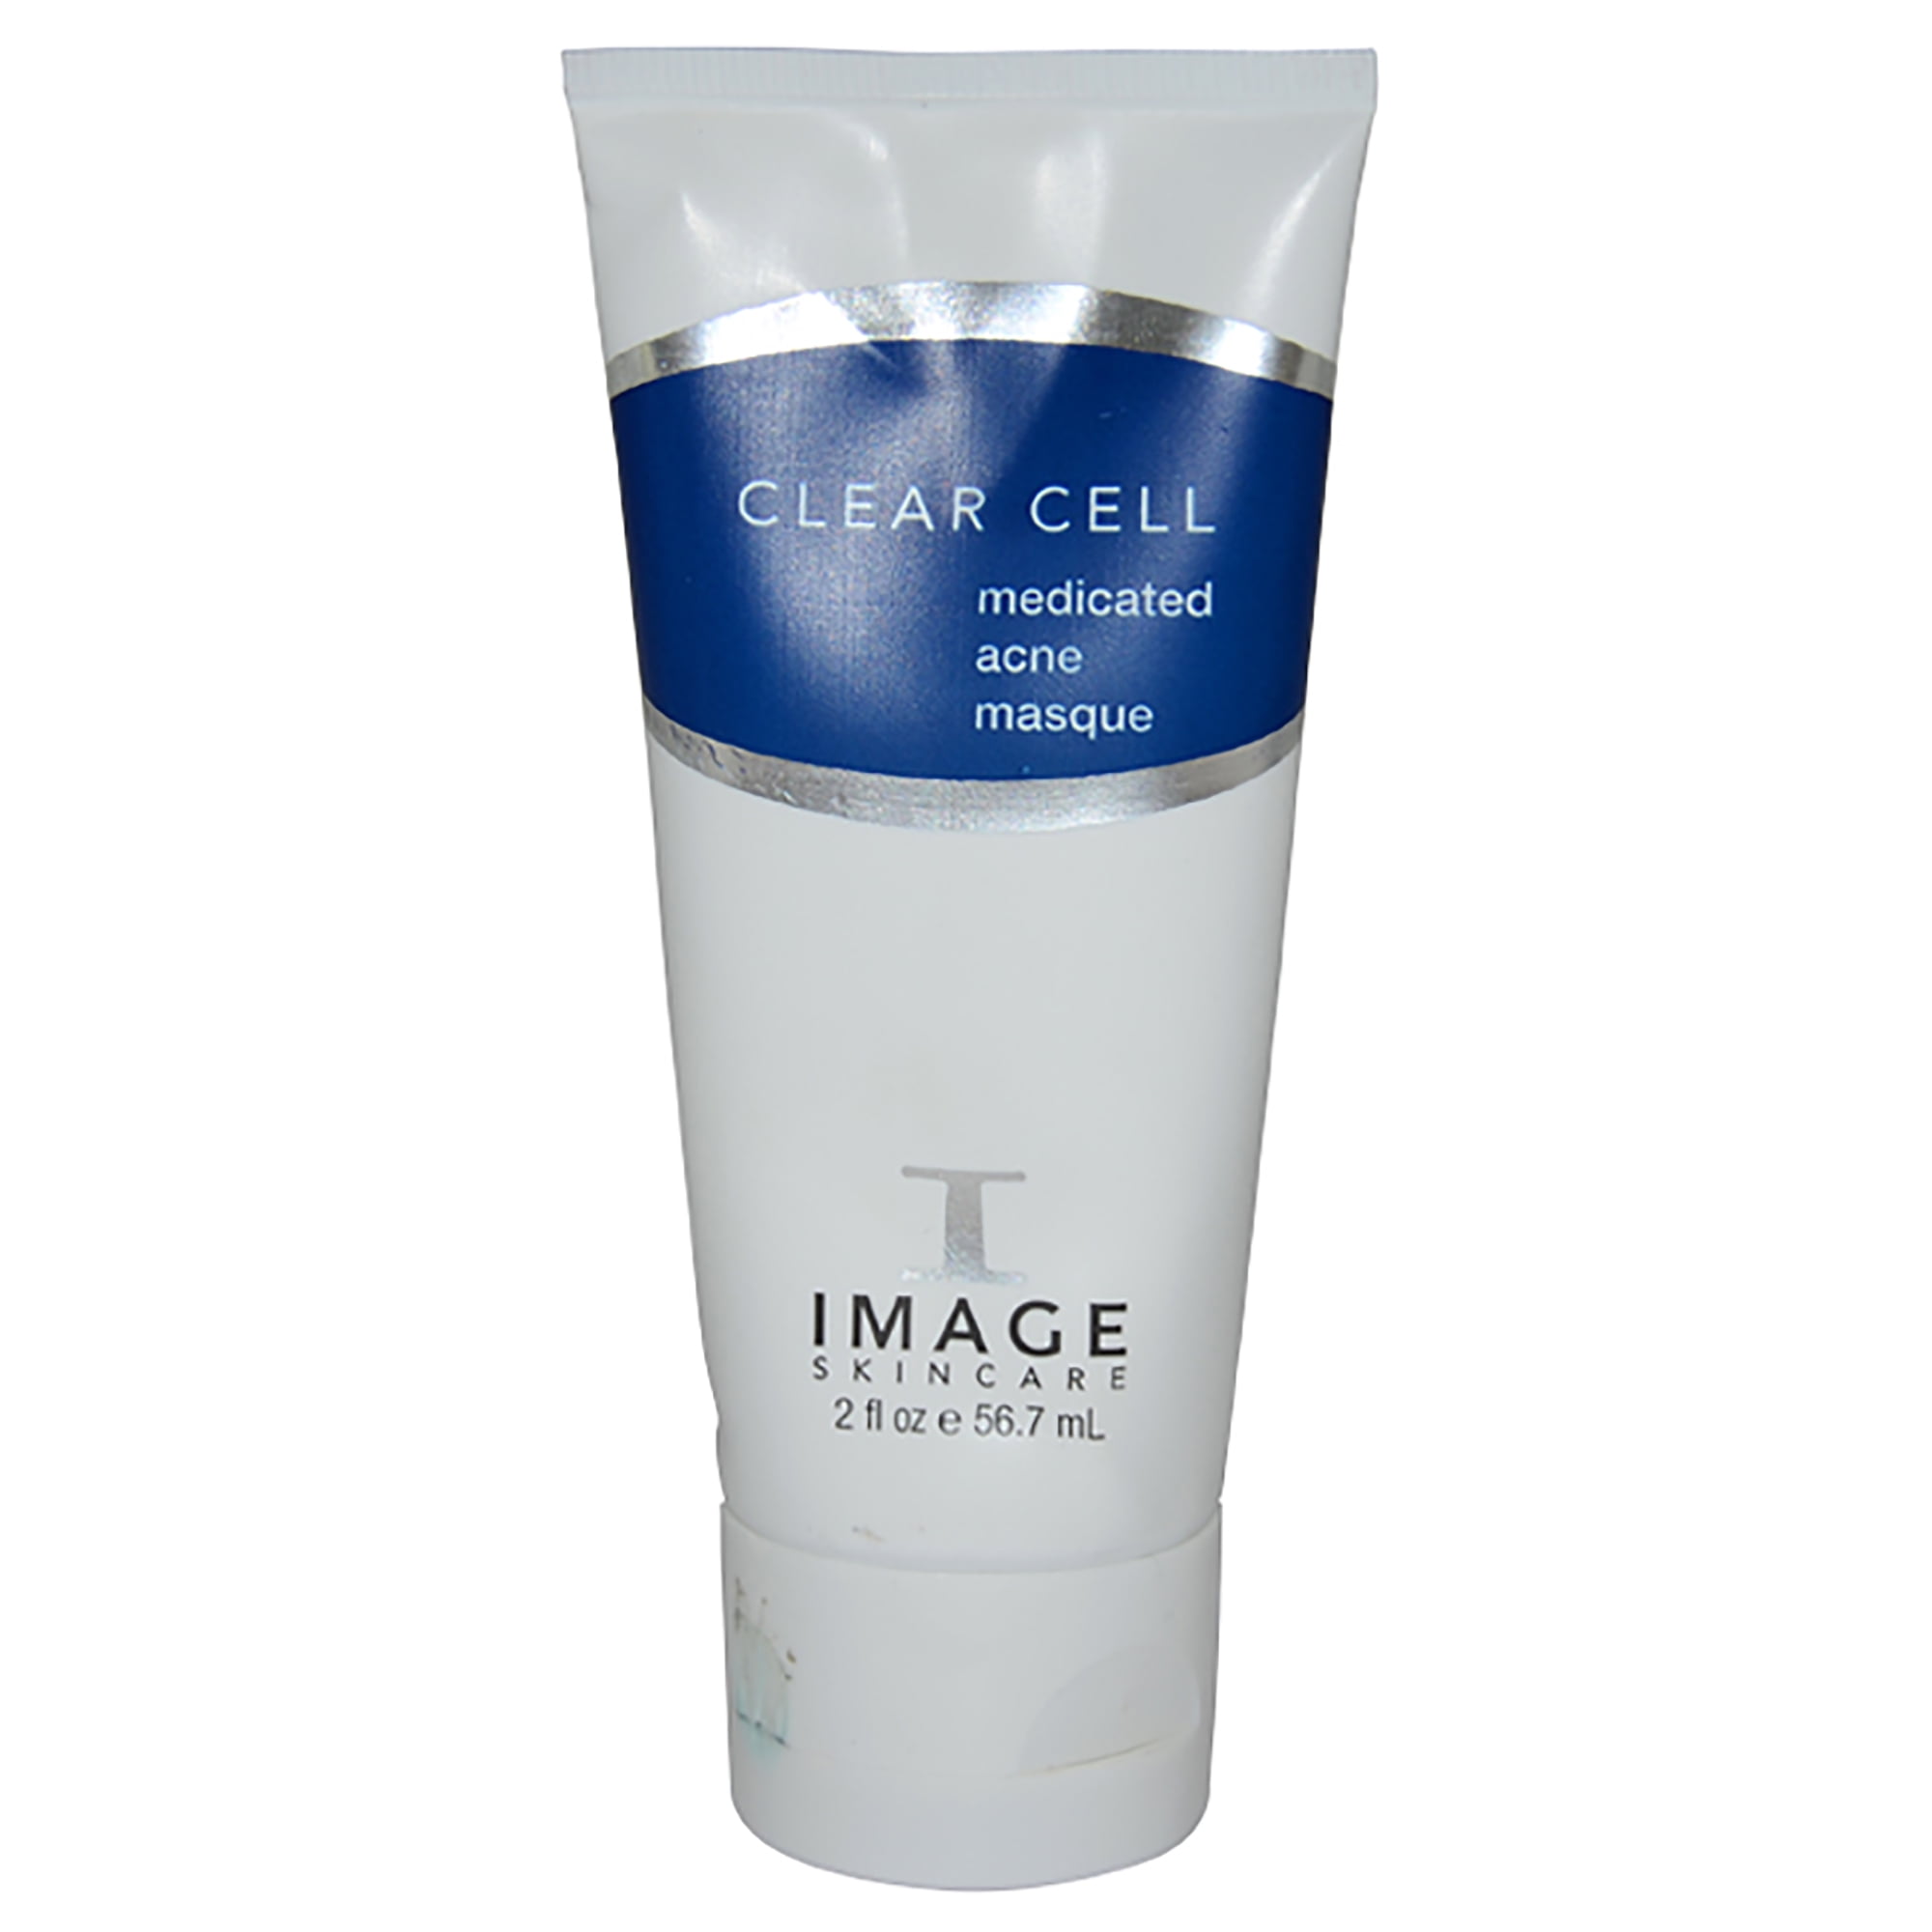 Clear Cell Medicated acne Masque. Image r Clear Cell Medicated acne Masque маска анти-акне с ана/вна и серой 56,7 мл. Маска Cell image. Clear Cell image Skincare. Clear cell